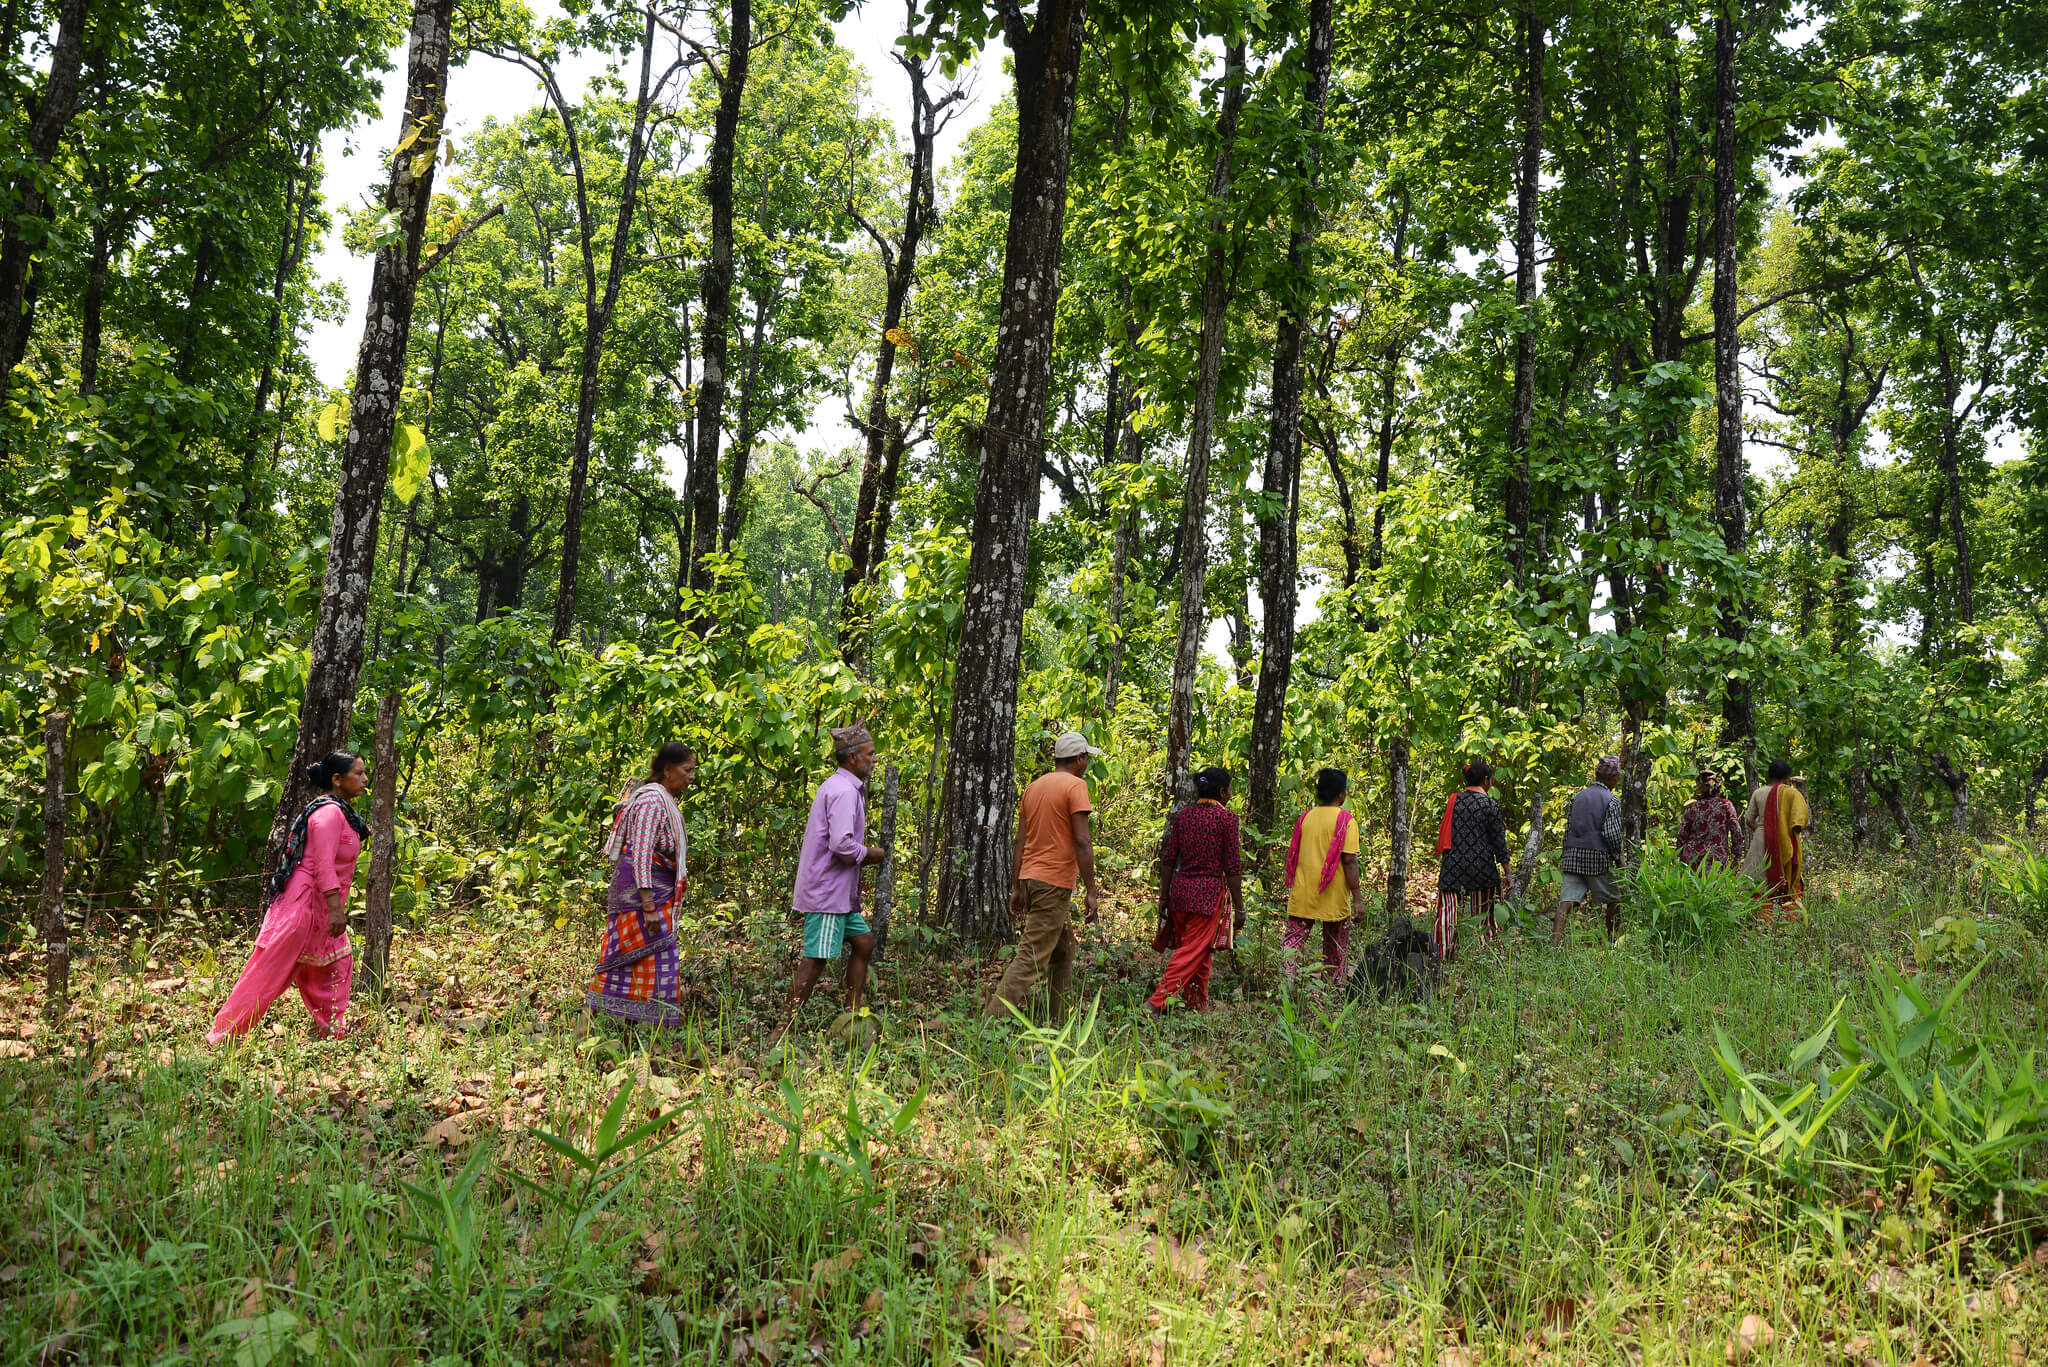 Securing land rights to protect forests and the climate